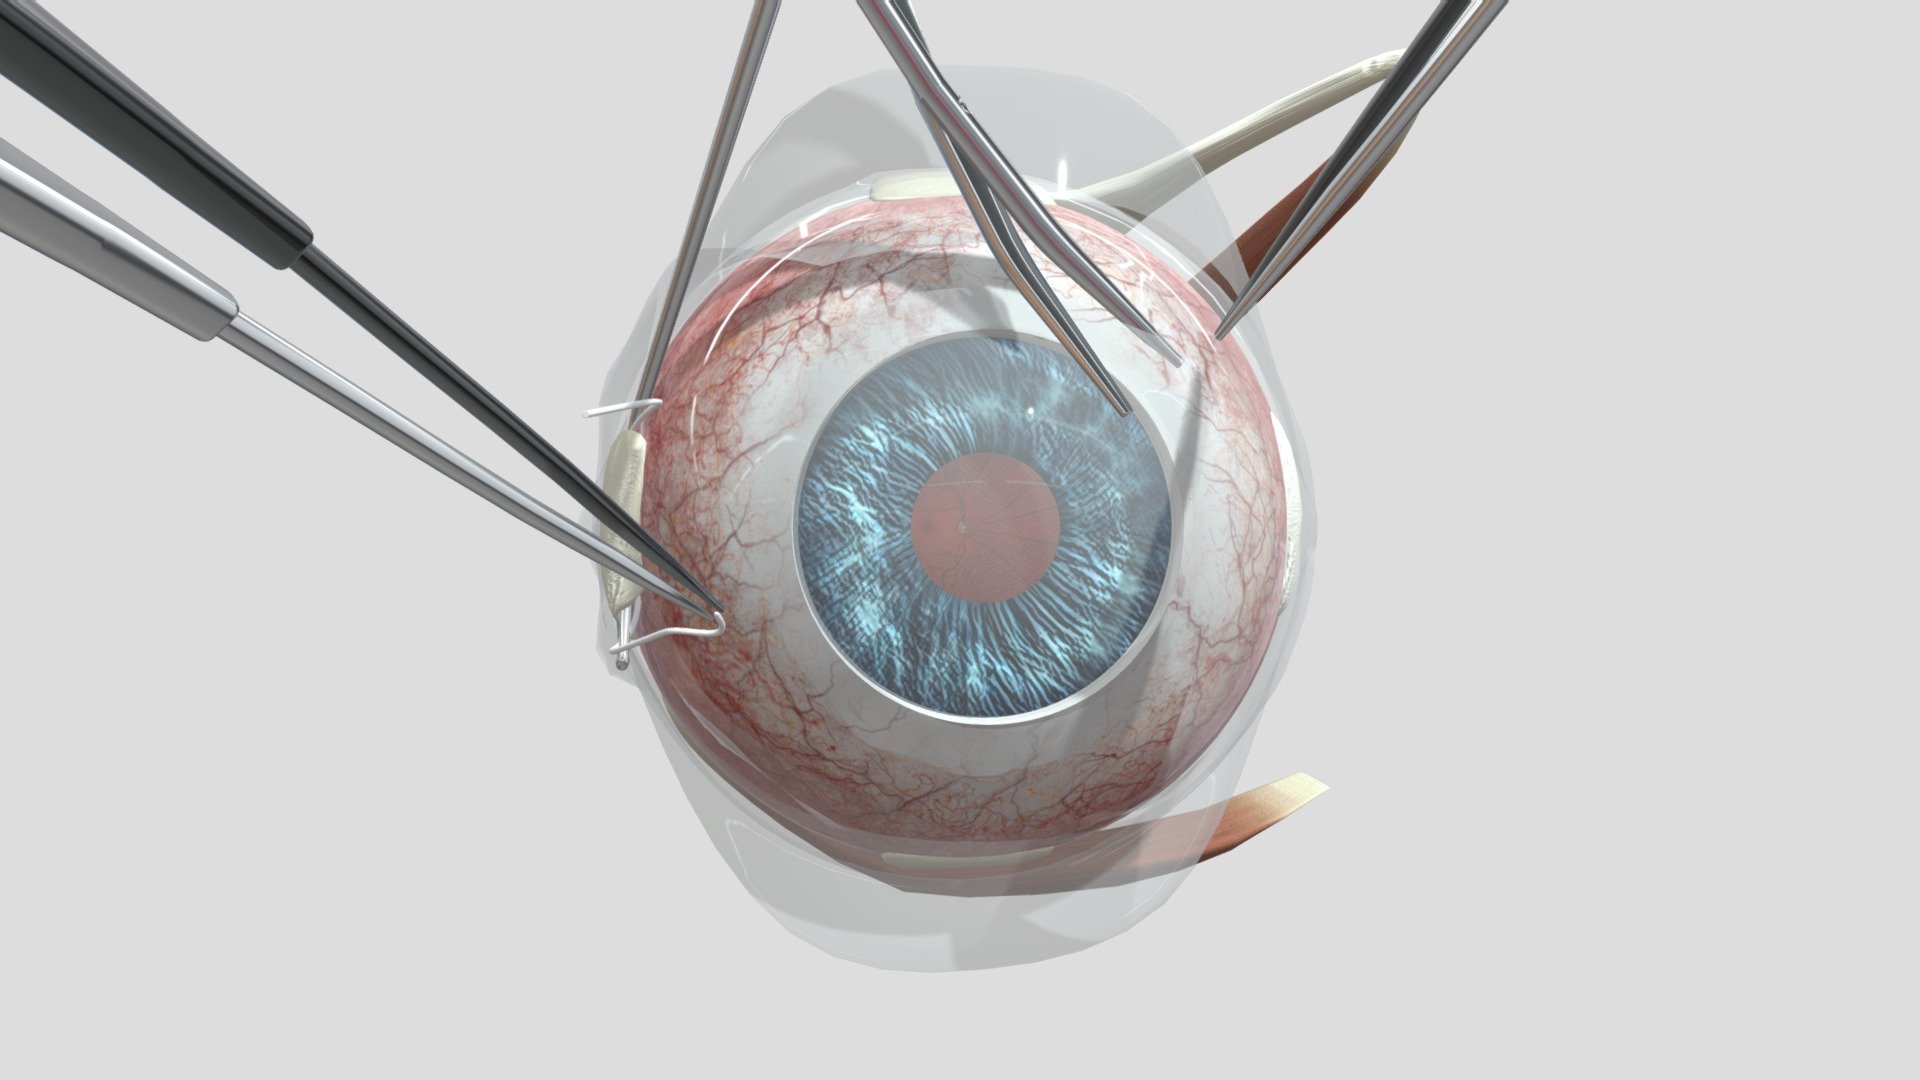 Scleral Buckle - Step 1